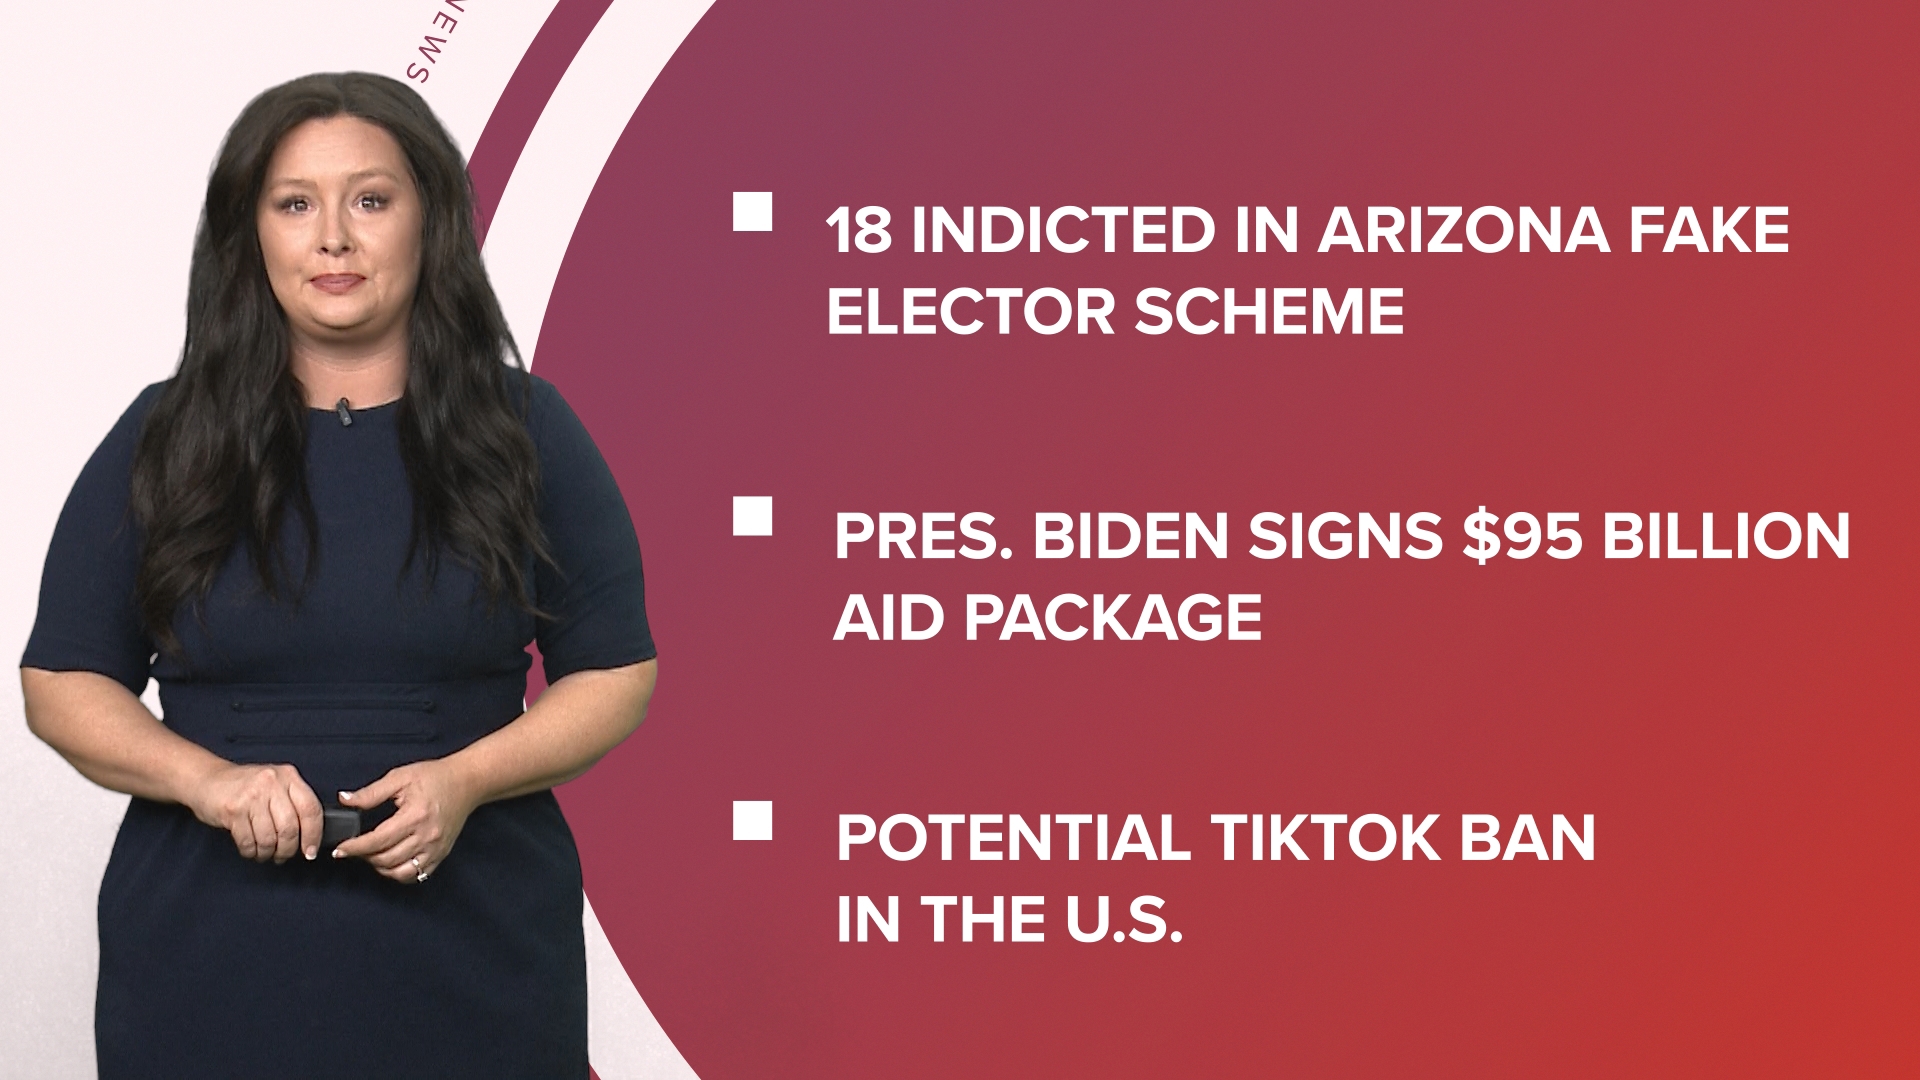 A look at what is happening in the news from abortion law back in the spotlight to Pres. Biden signing a foreign aid bill and new airline rules to help consumers.